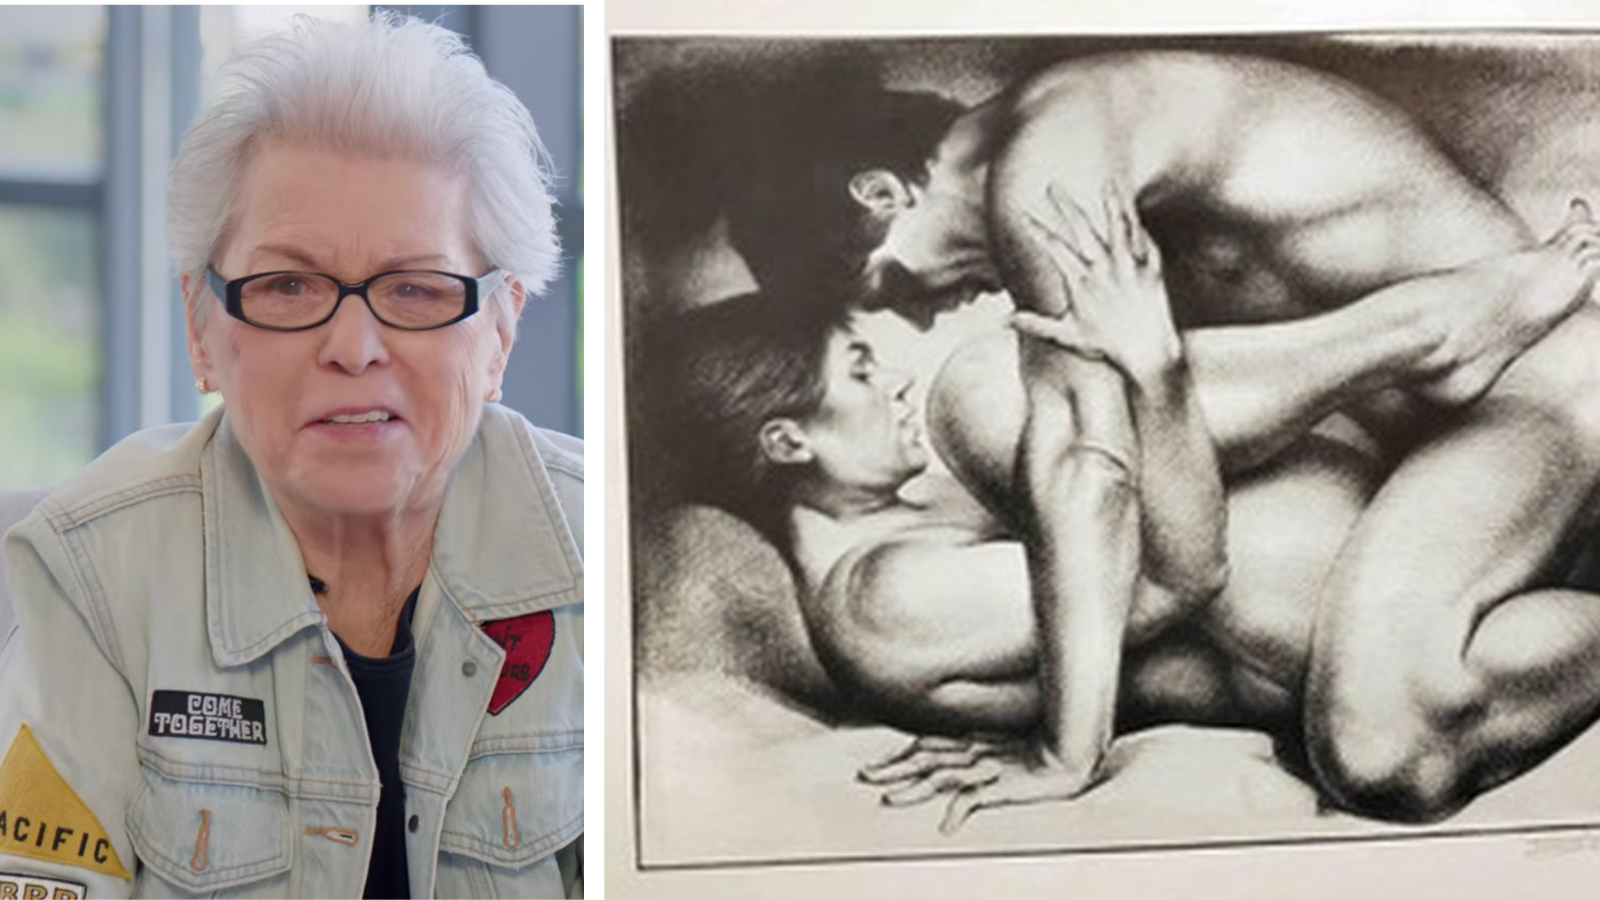 chip moses recommends betty dodson masturbation video pic